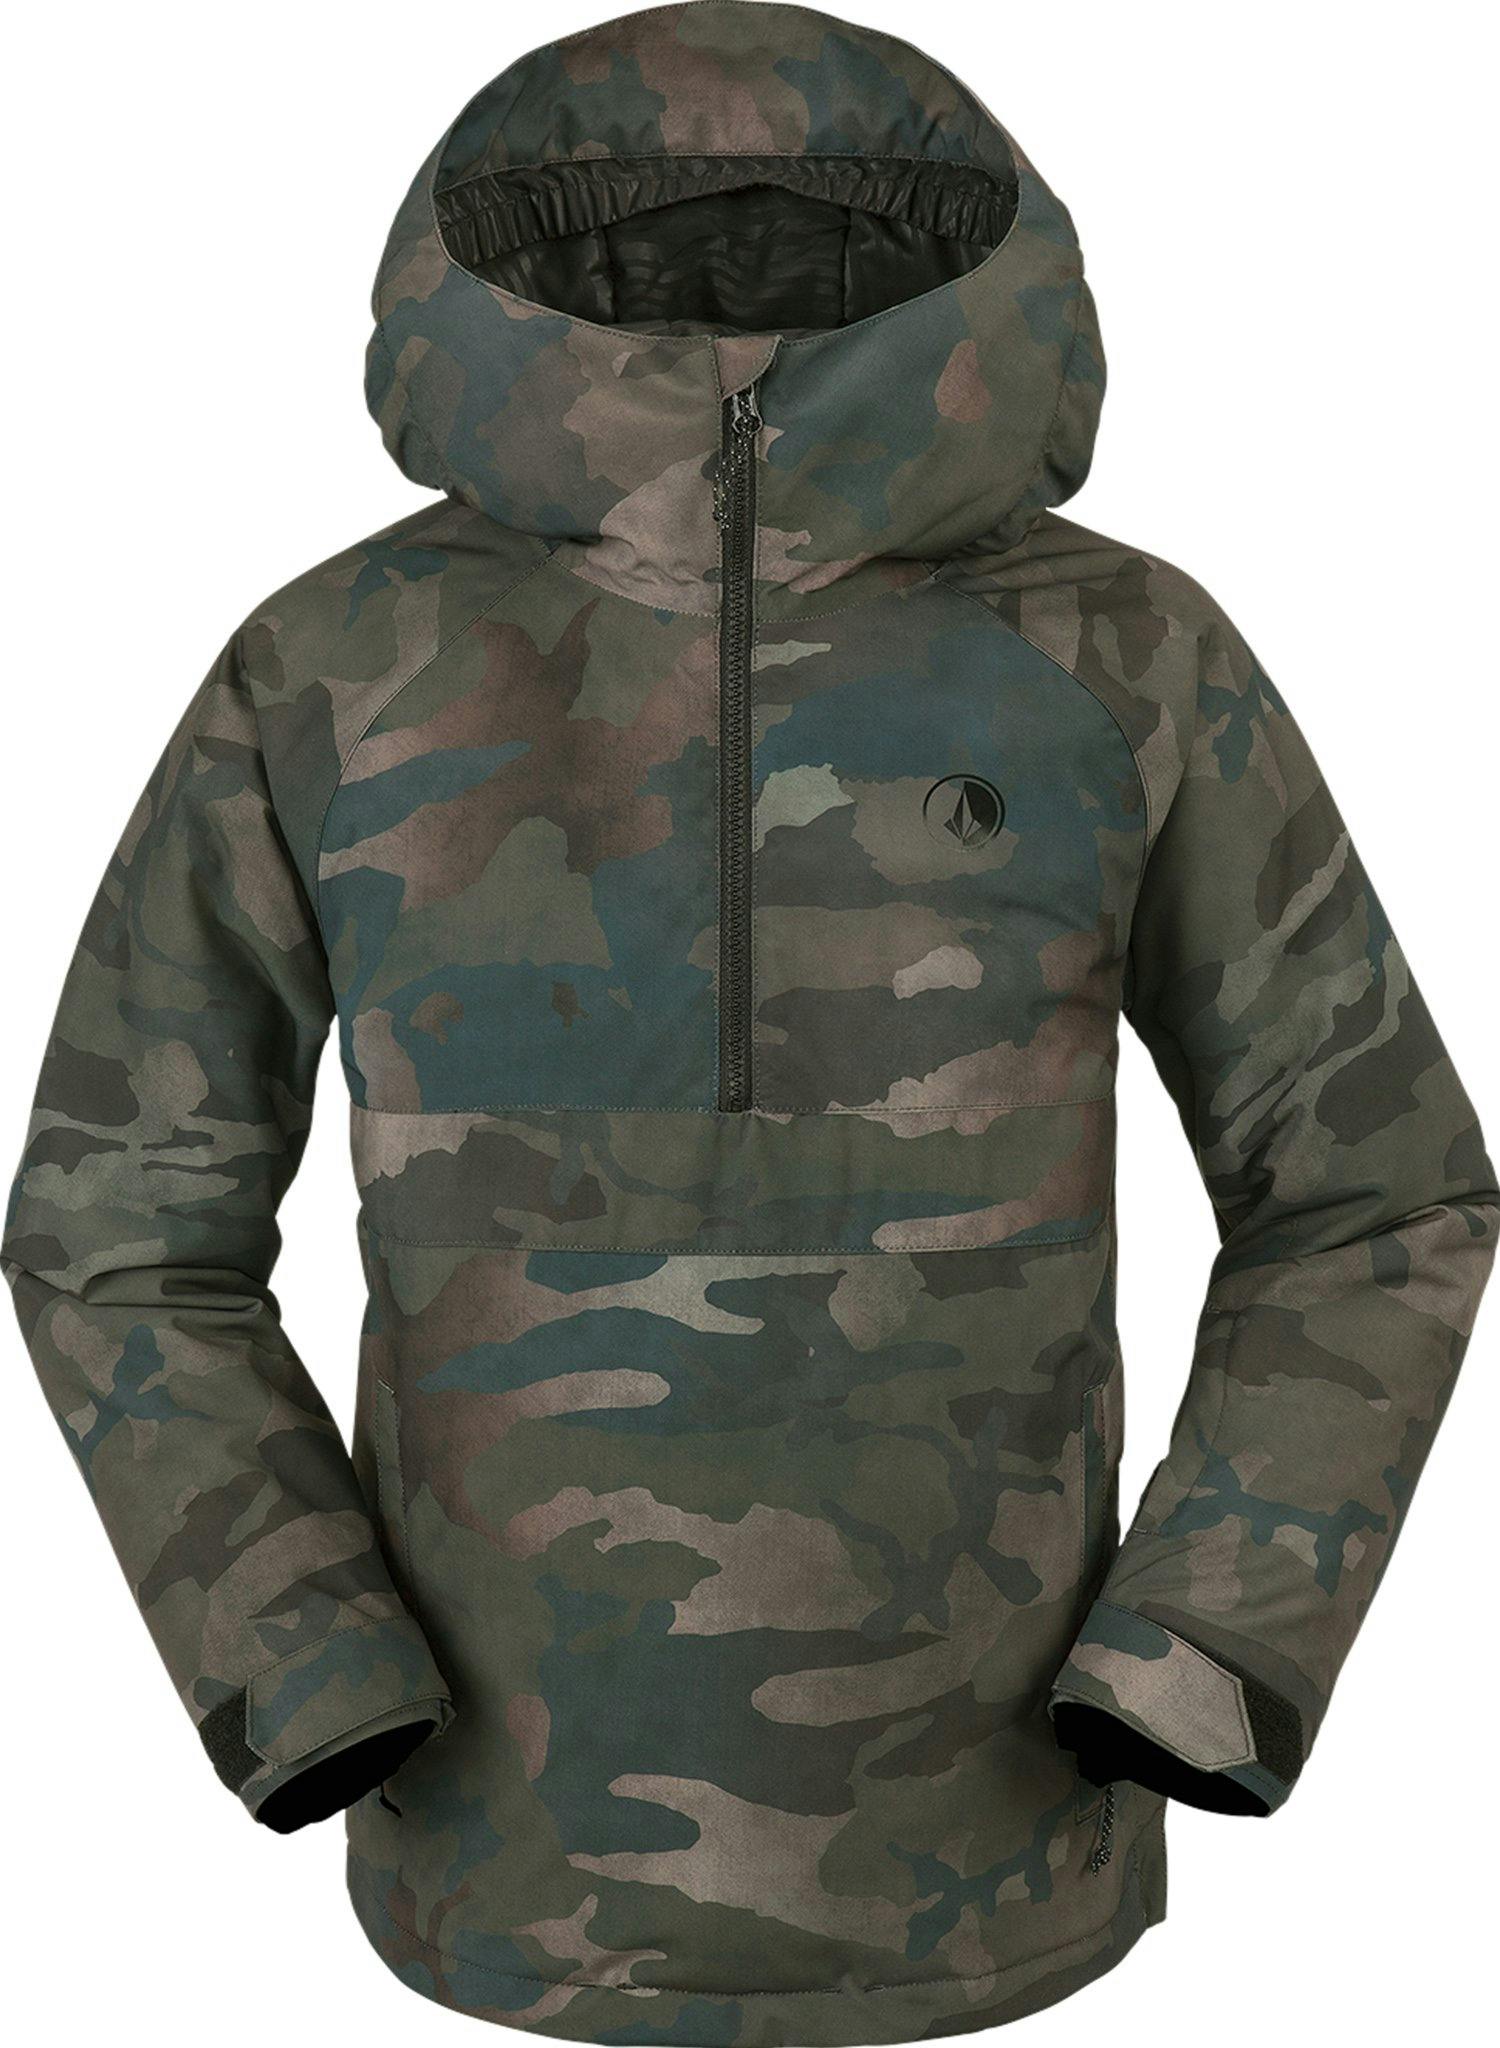 Product image for Sluff Pullover Insulated Jacket - Youth